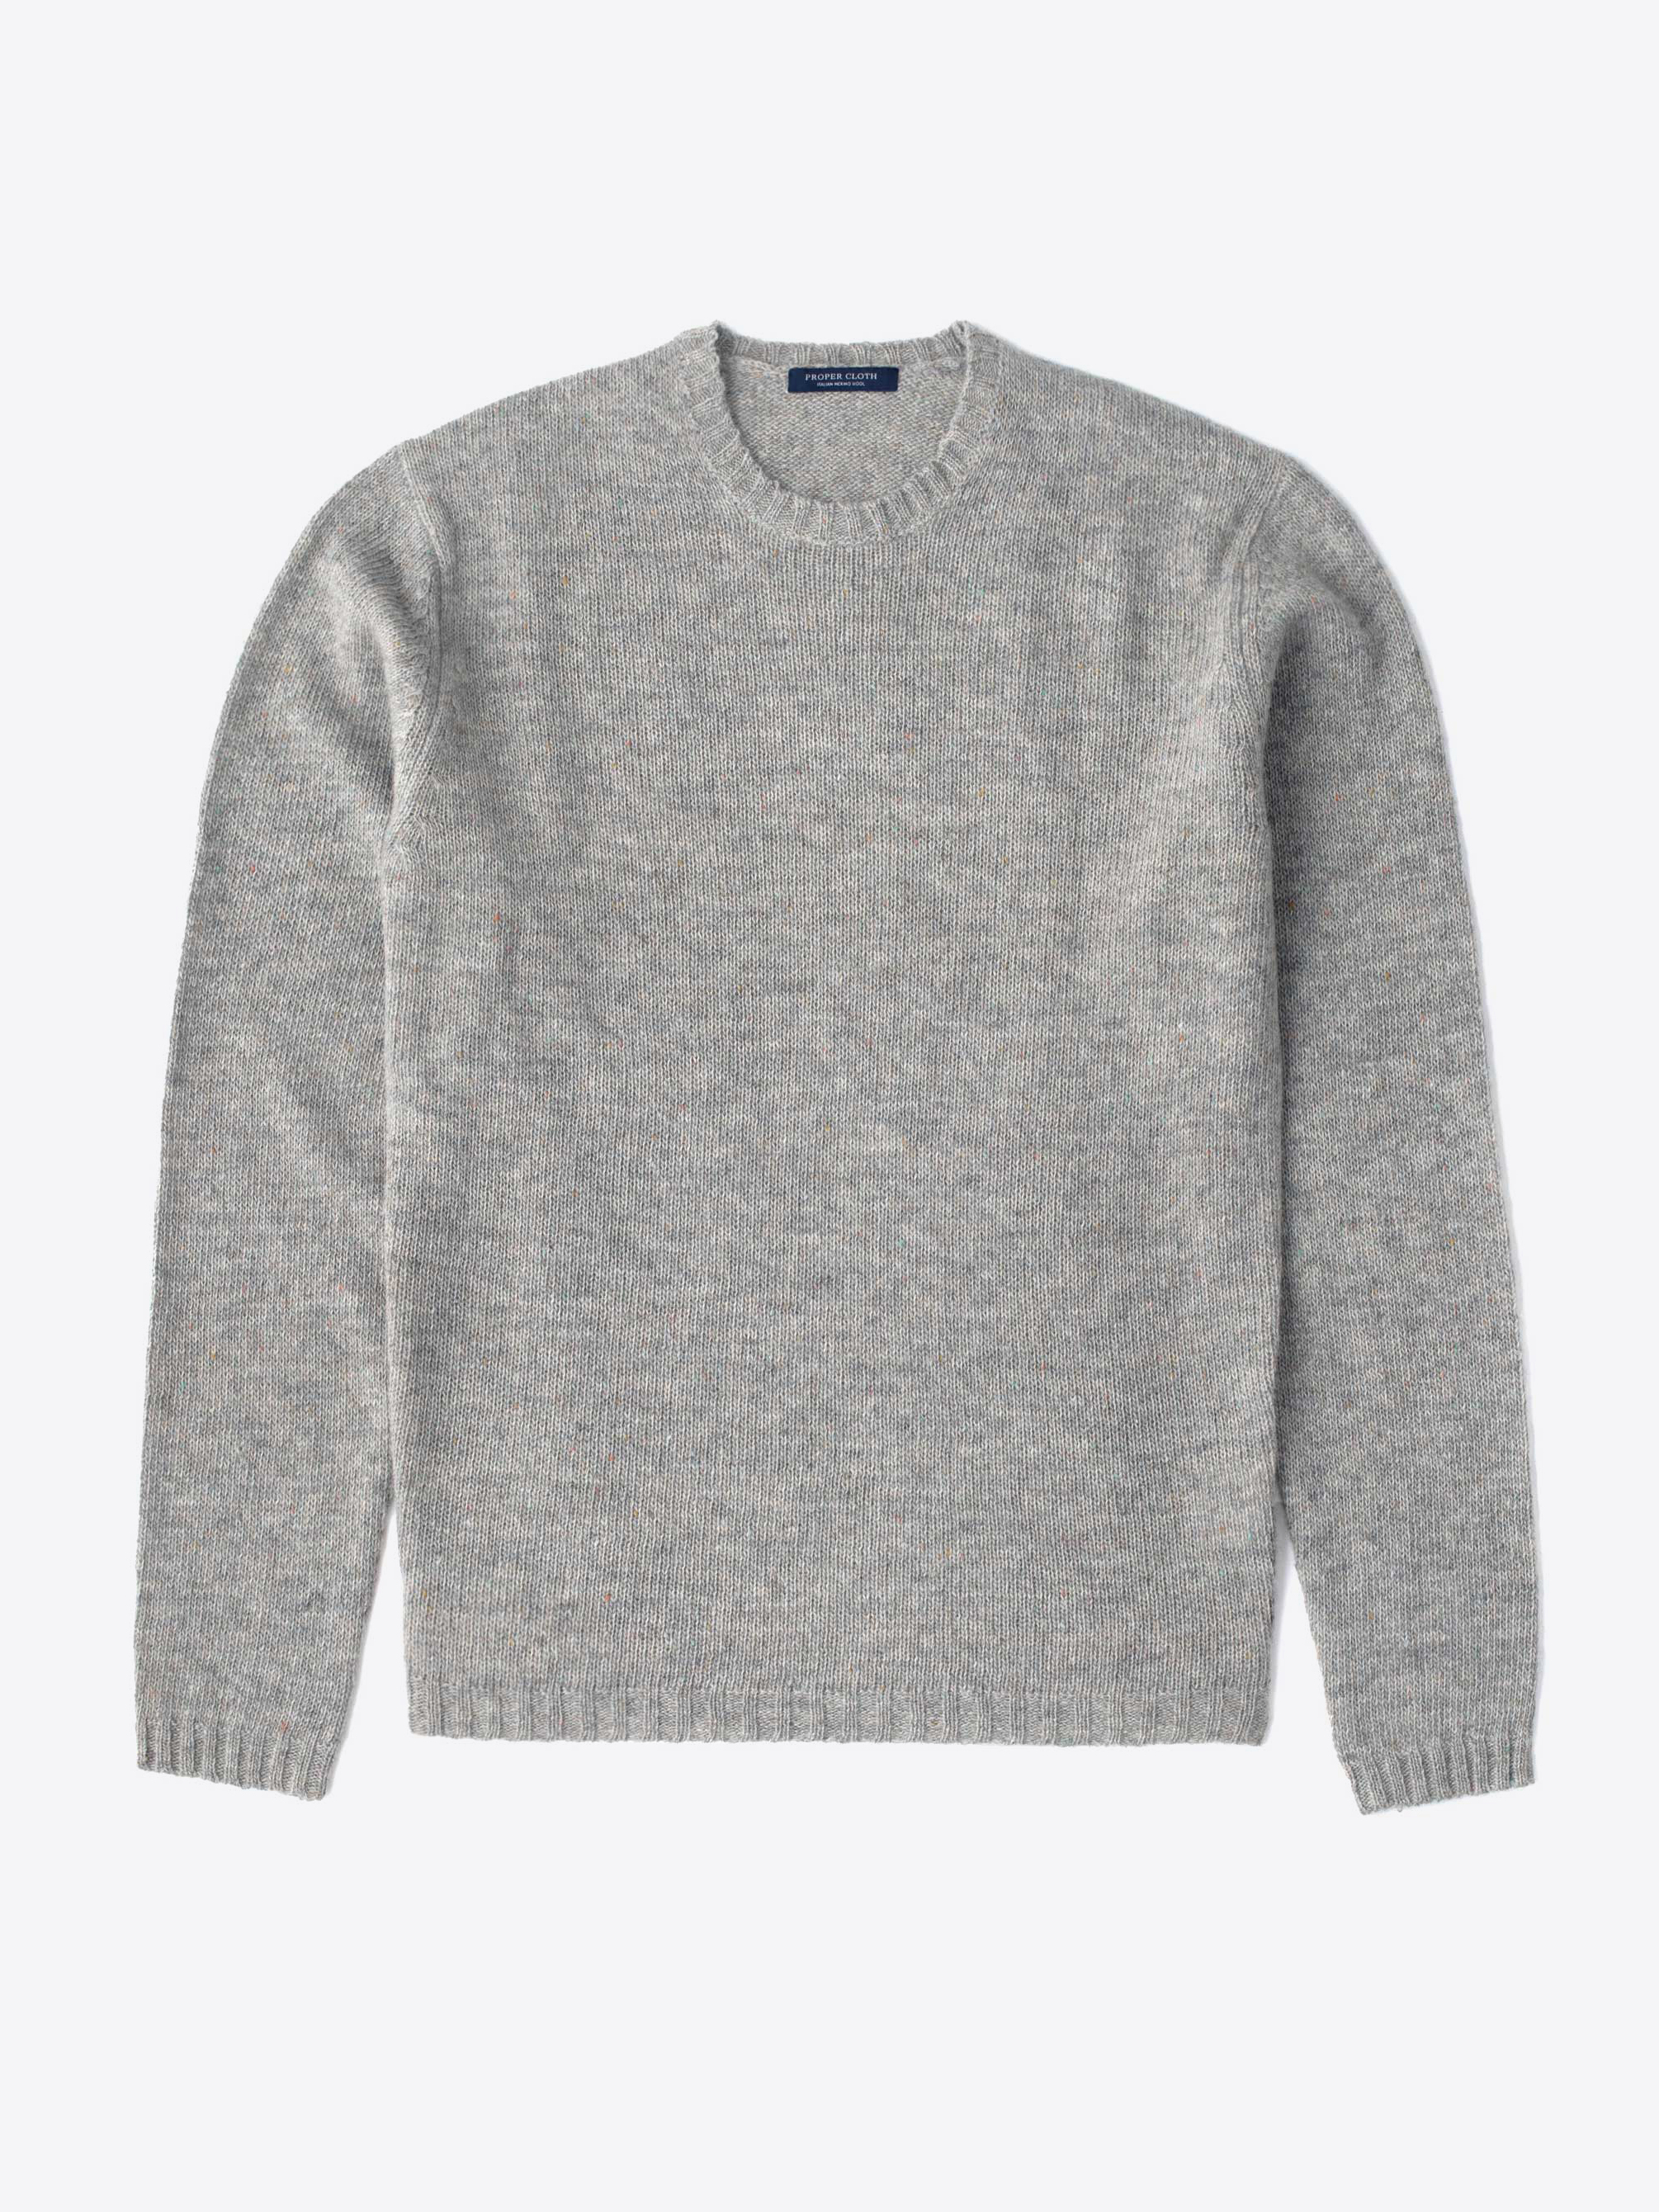 Zoom Image of Fog Donegal Lambswool Sweater